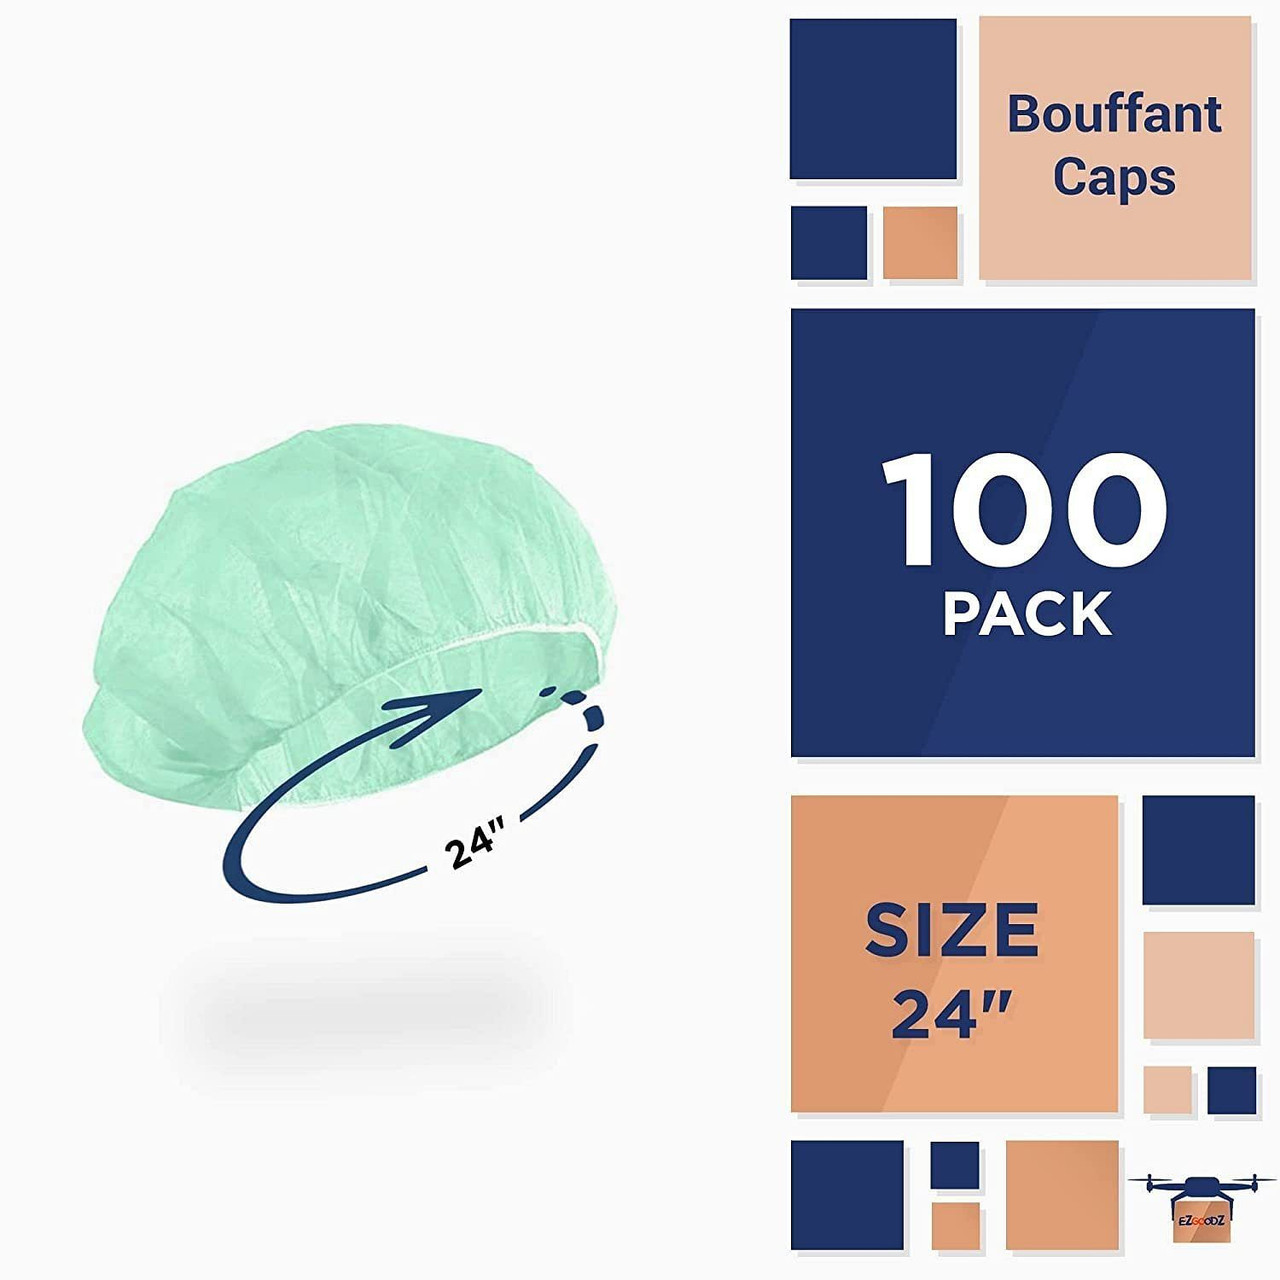 Disposable Hair Net for Men and Women 24", Pack of 100 Green Bouffant Hair Nets with Stretchy Edge,